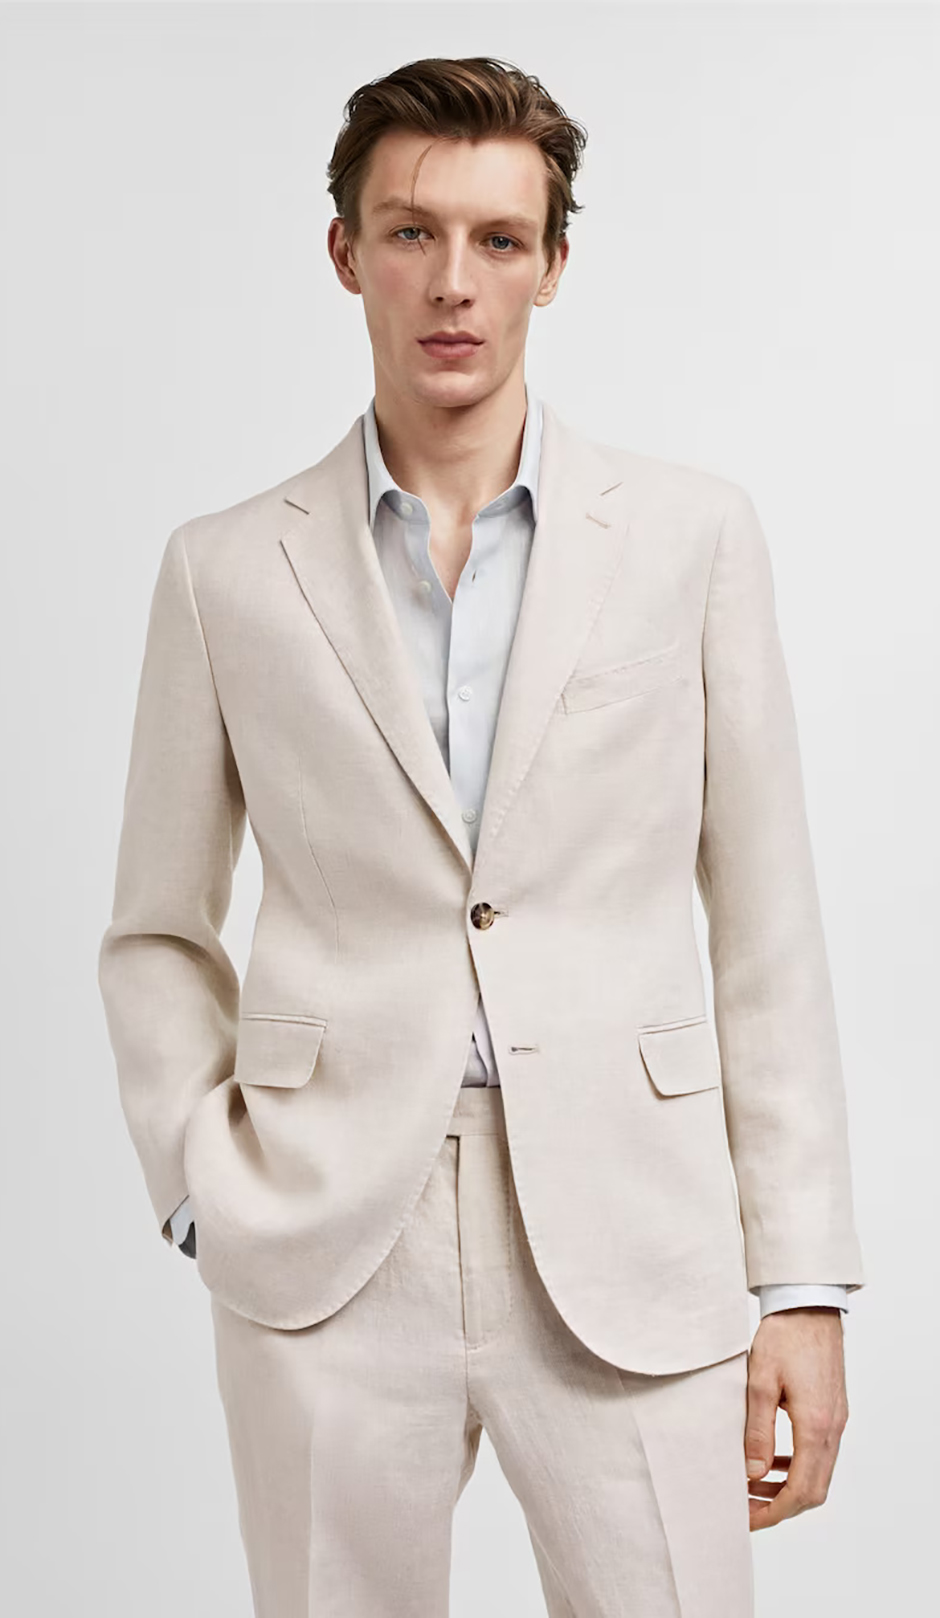 Linen suit for groom from Mango